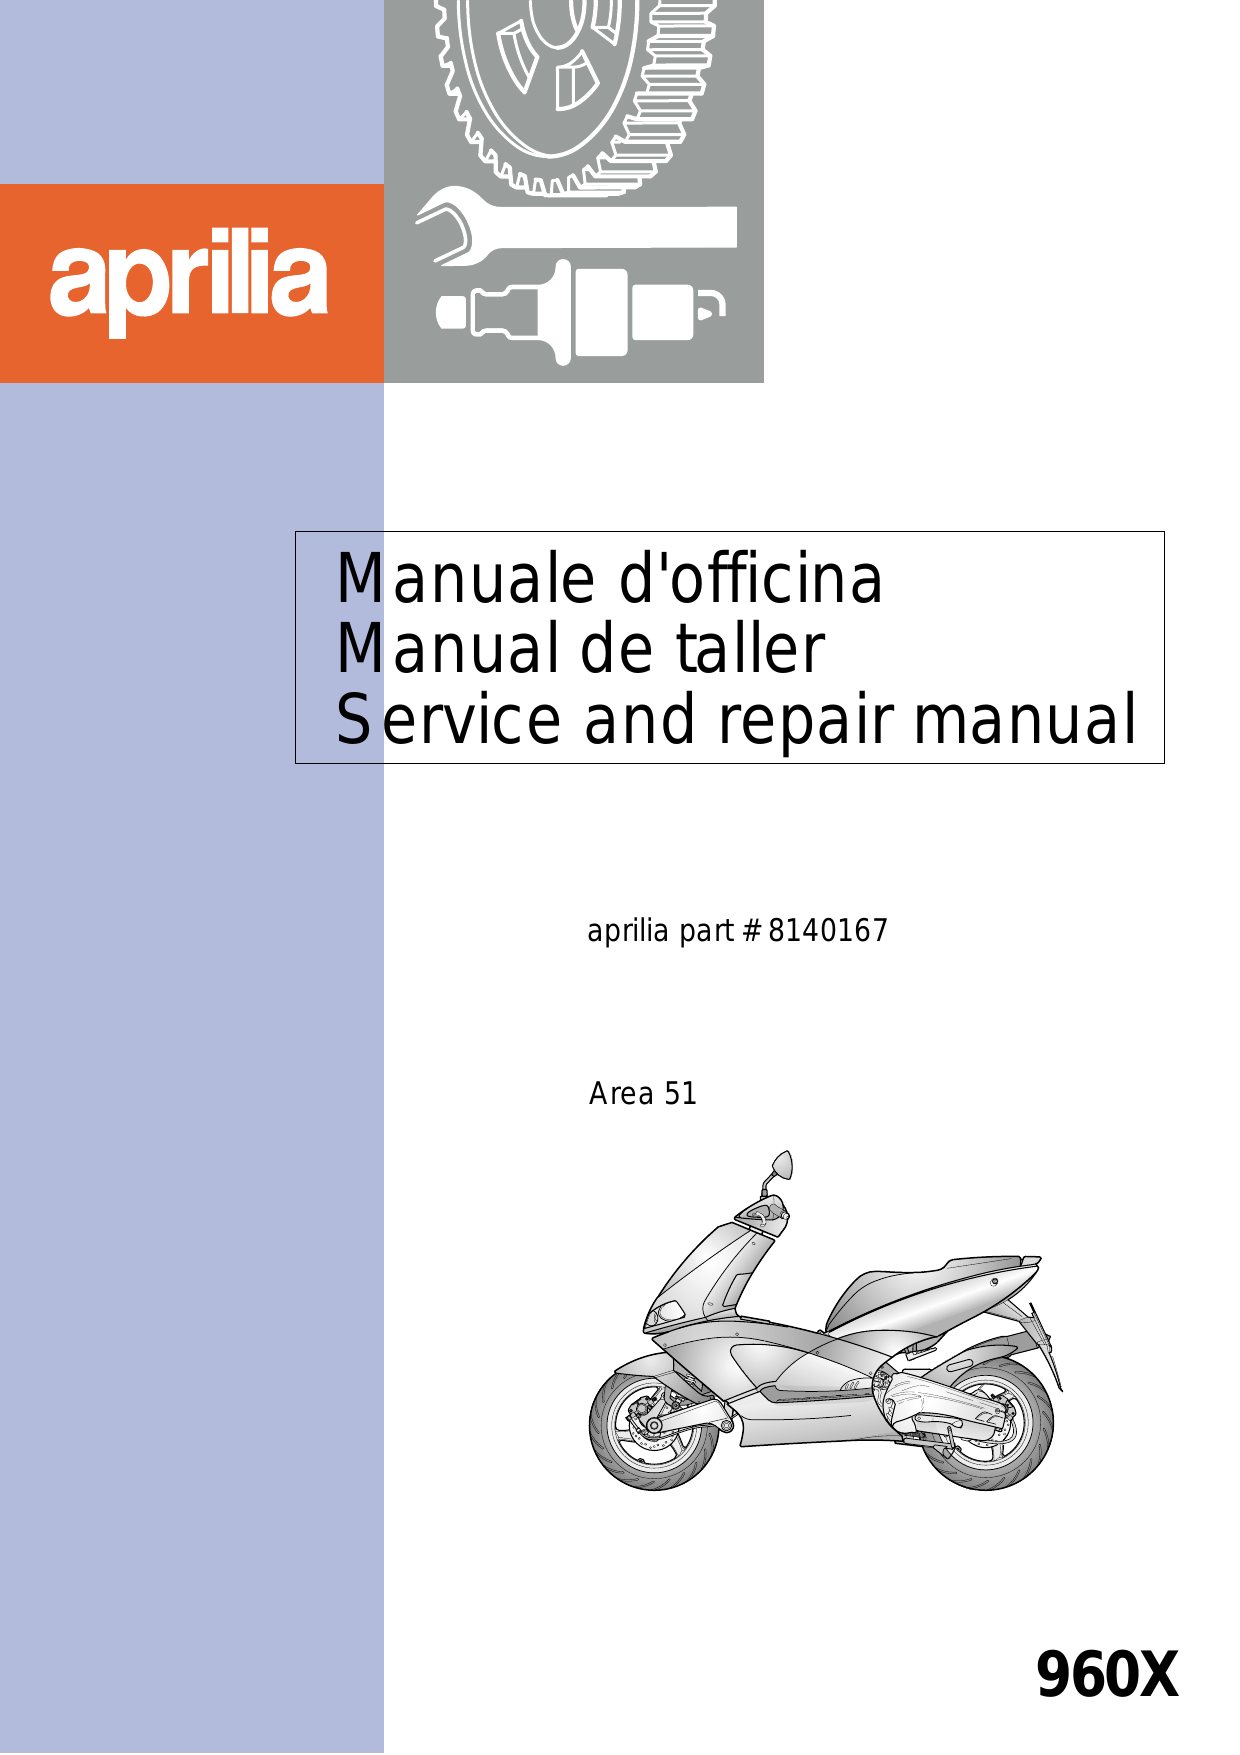 Aprilia Area 51 scooter, 960x service and repair manual Preview image 6